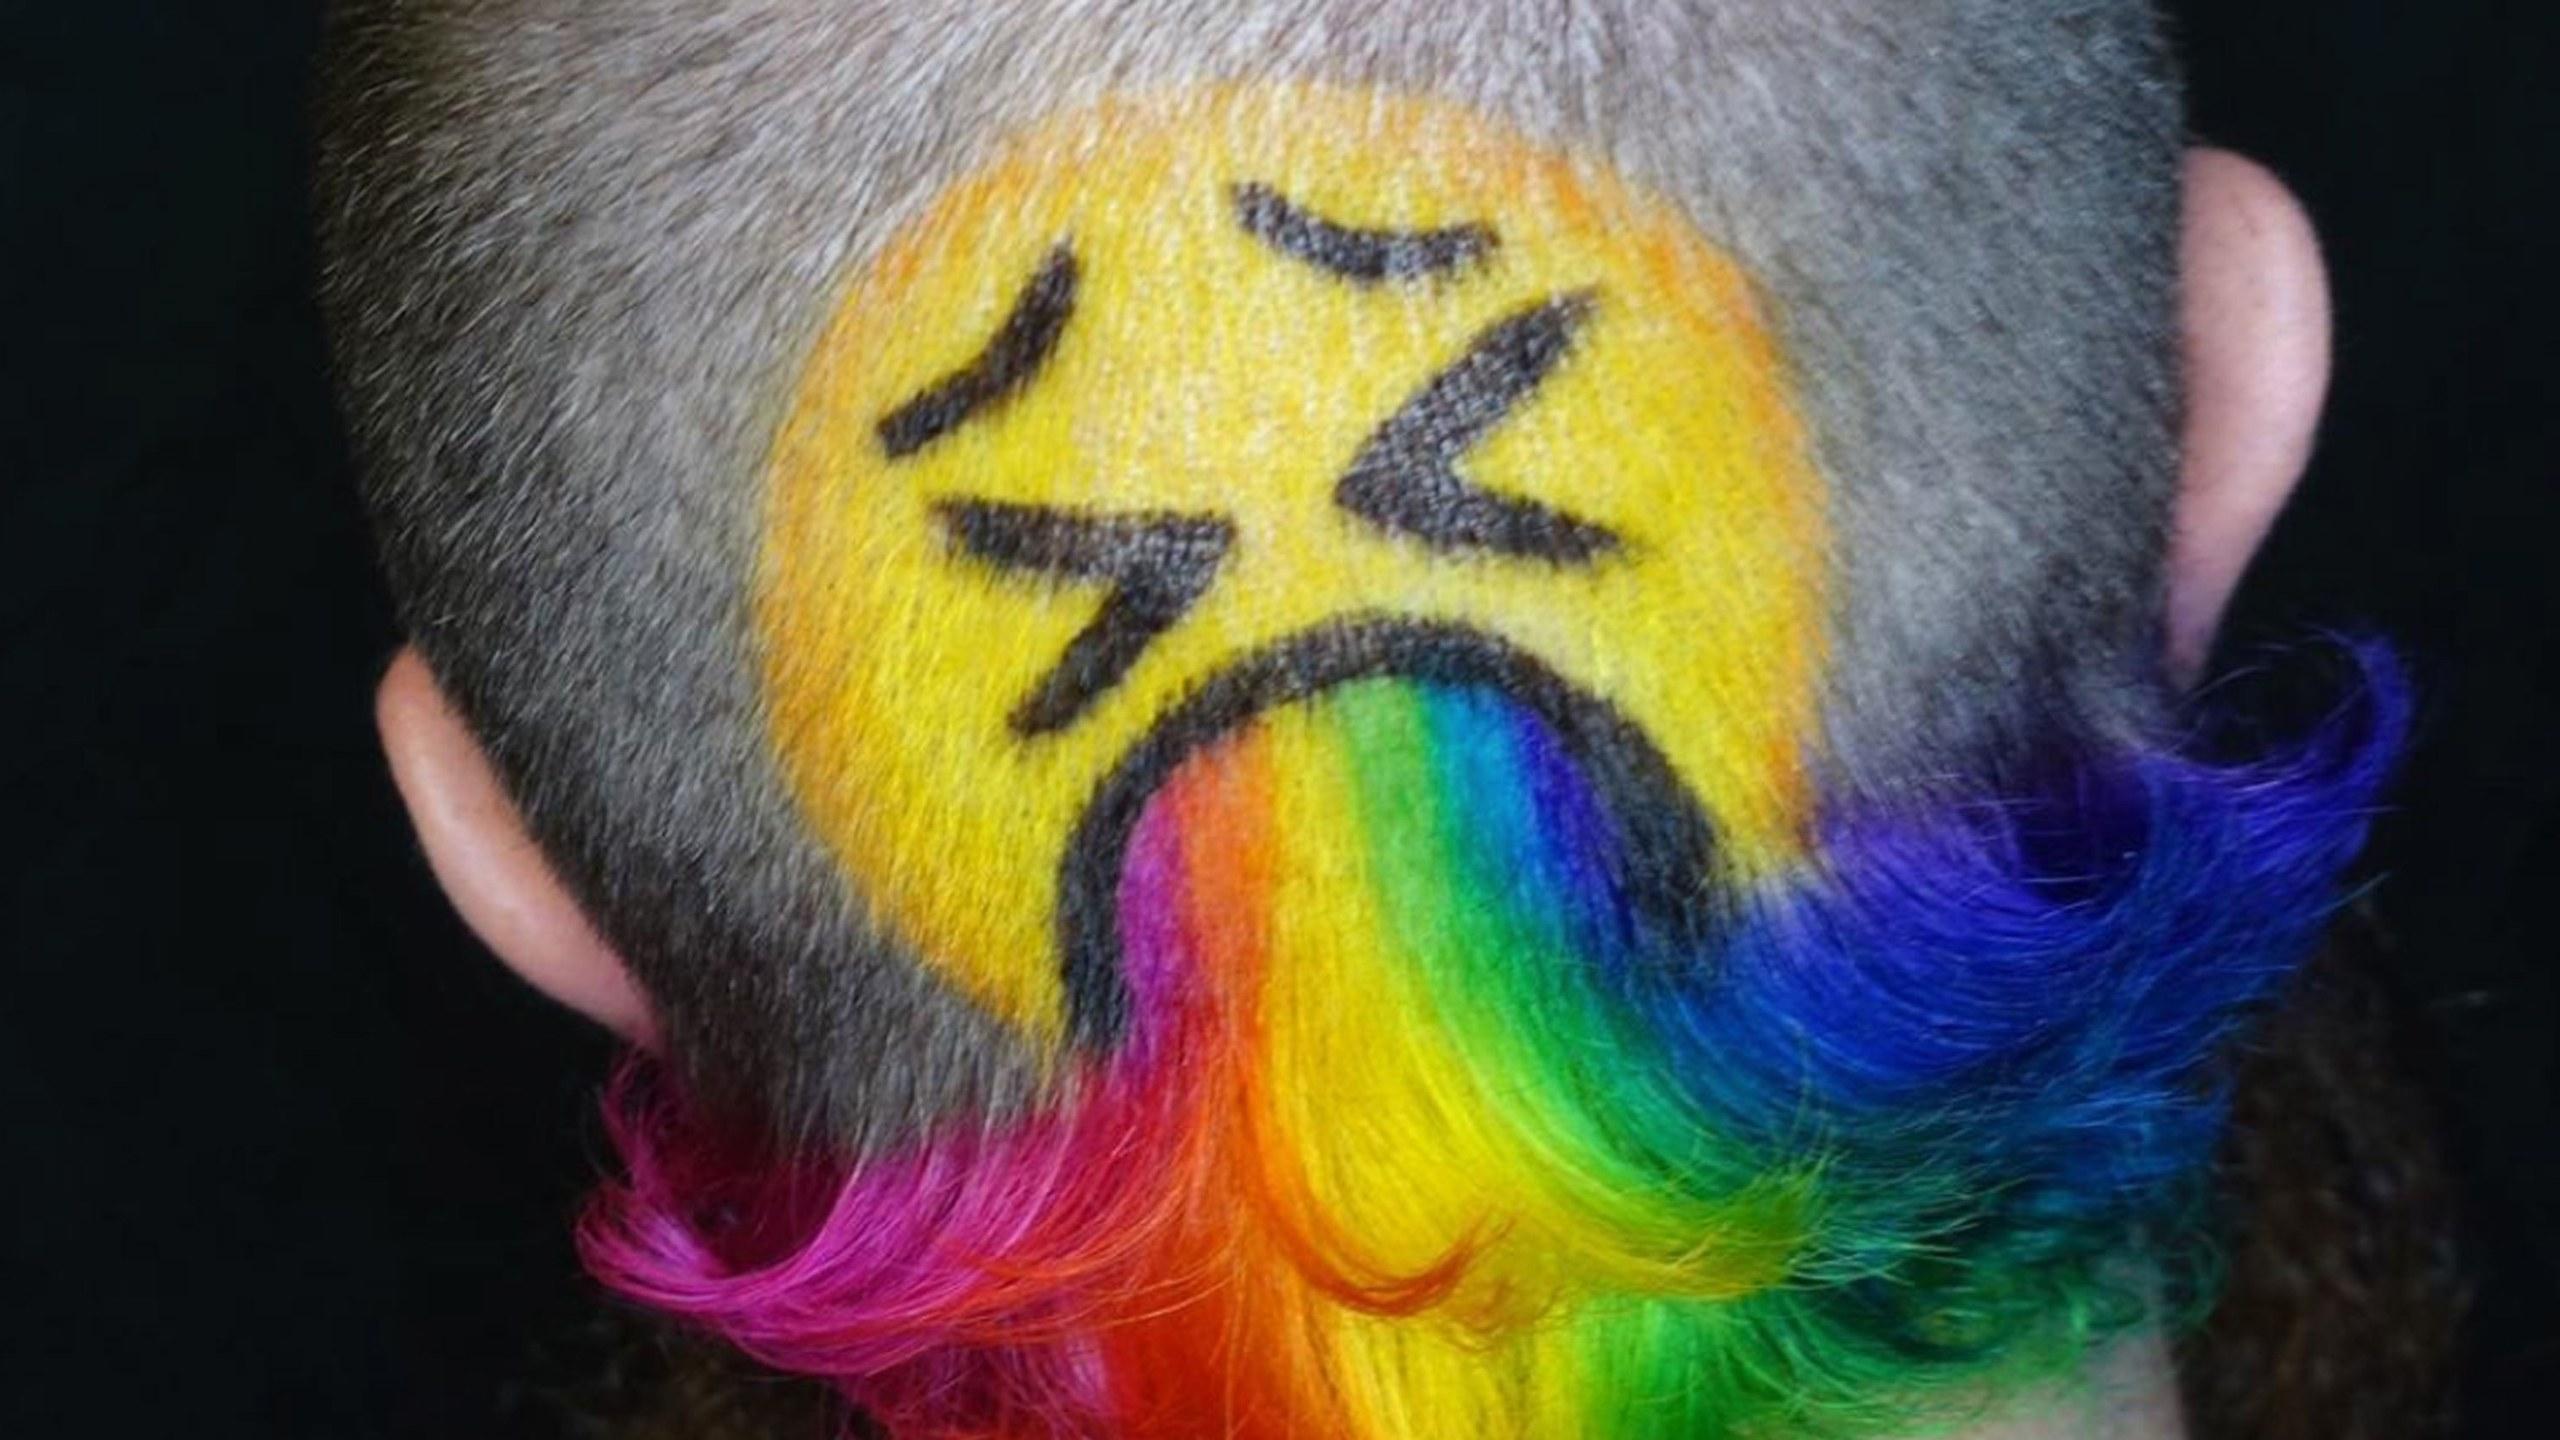 Someone Dyed Their Hair to Look Like a Vomiting Emoji and It's